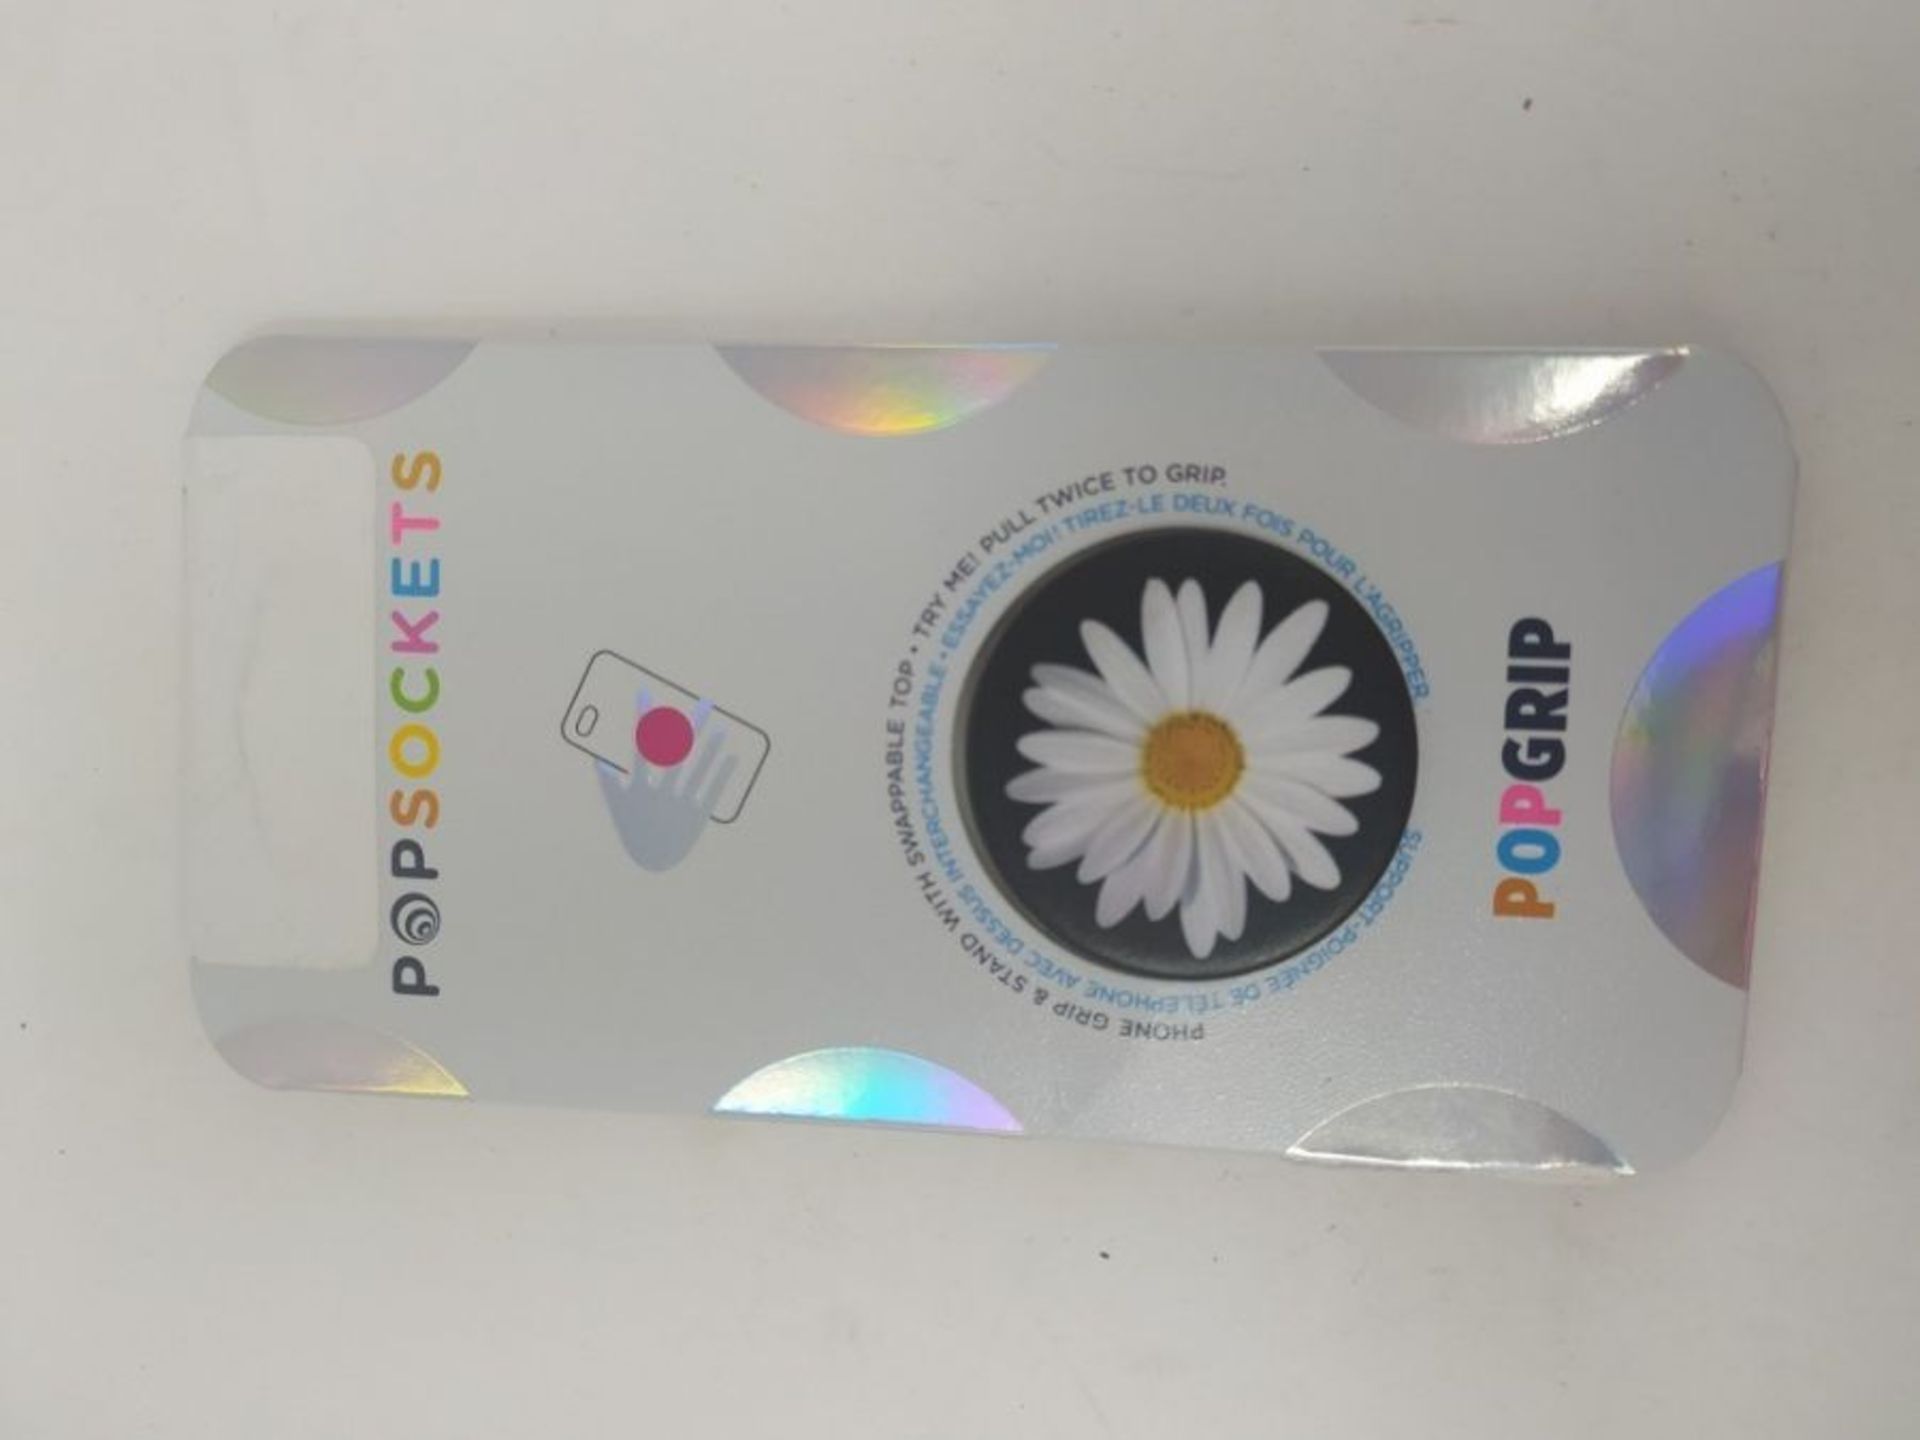 PopSockets PopGrip - Expanding Stand and Grip with Swappable Top - White Daisy - Image 2 of 2